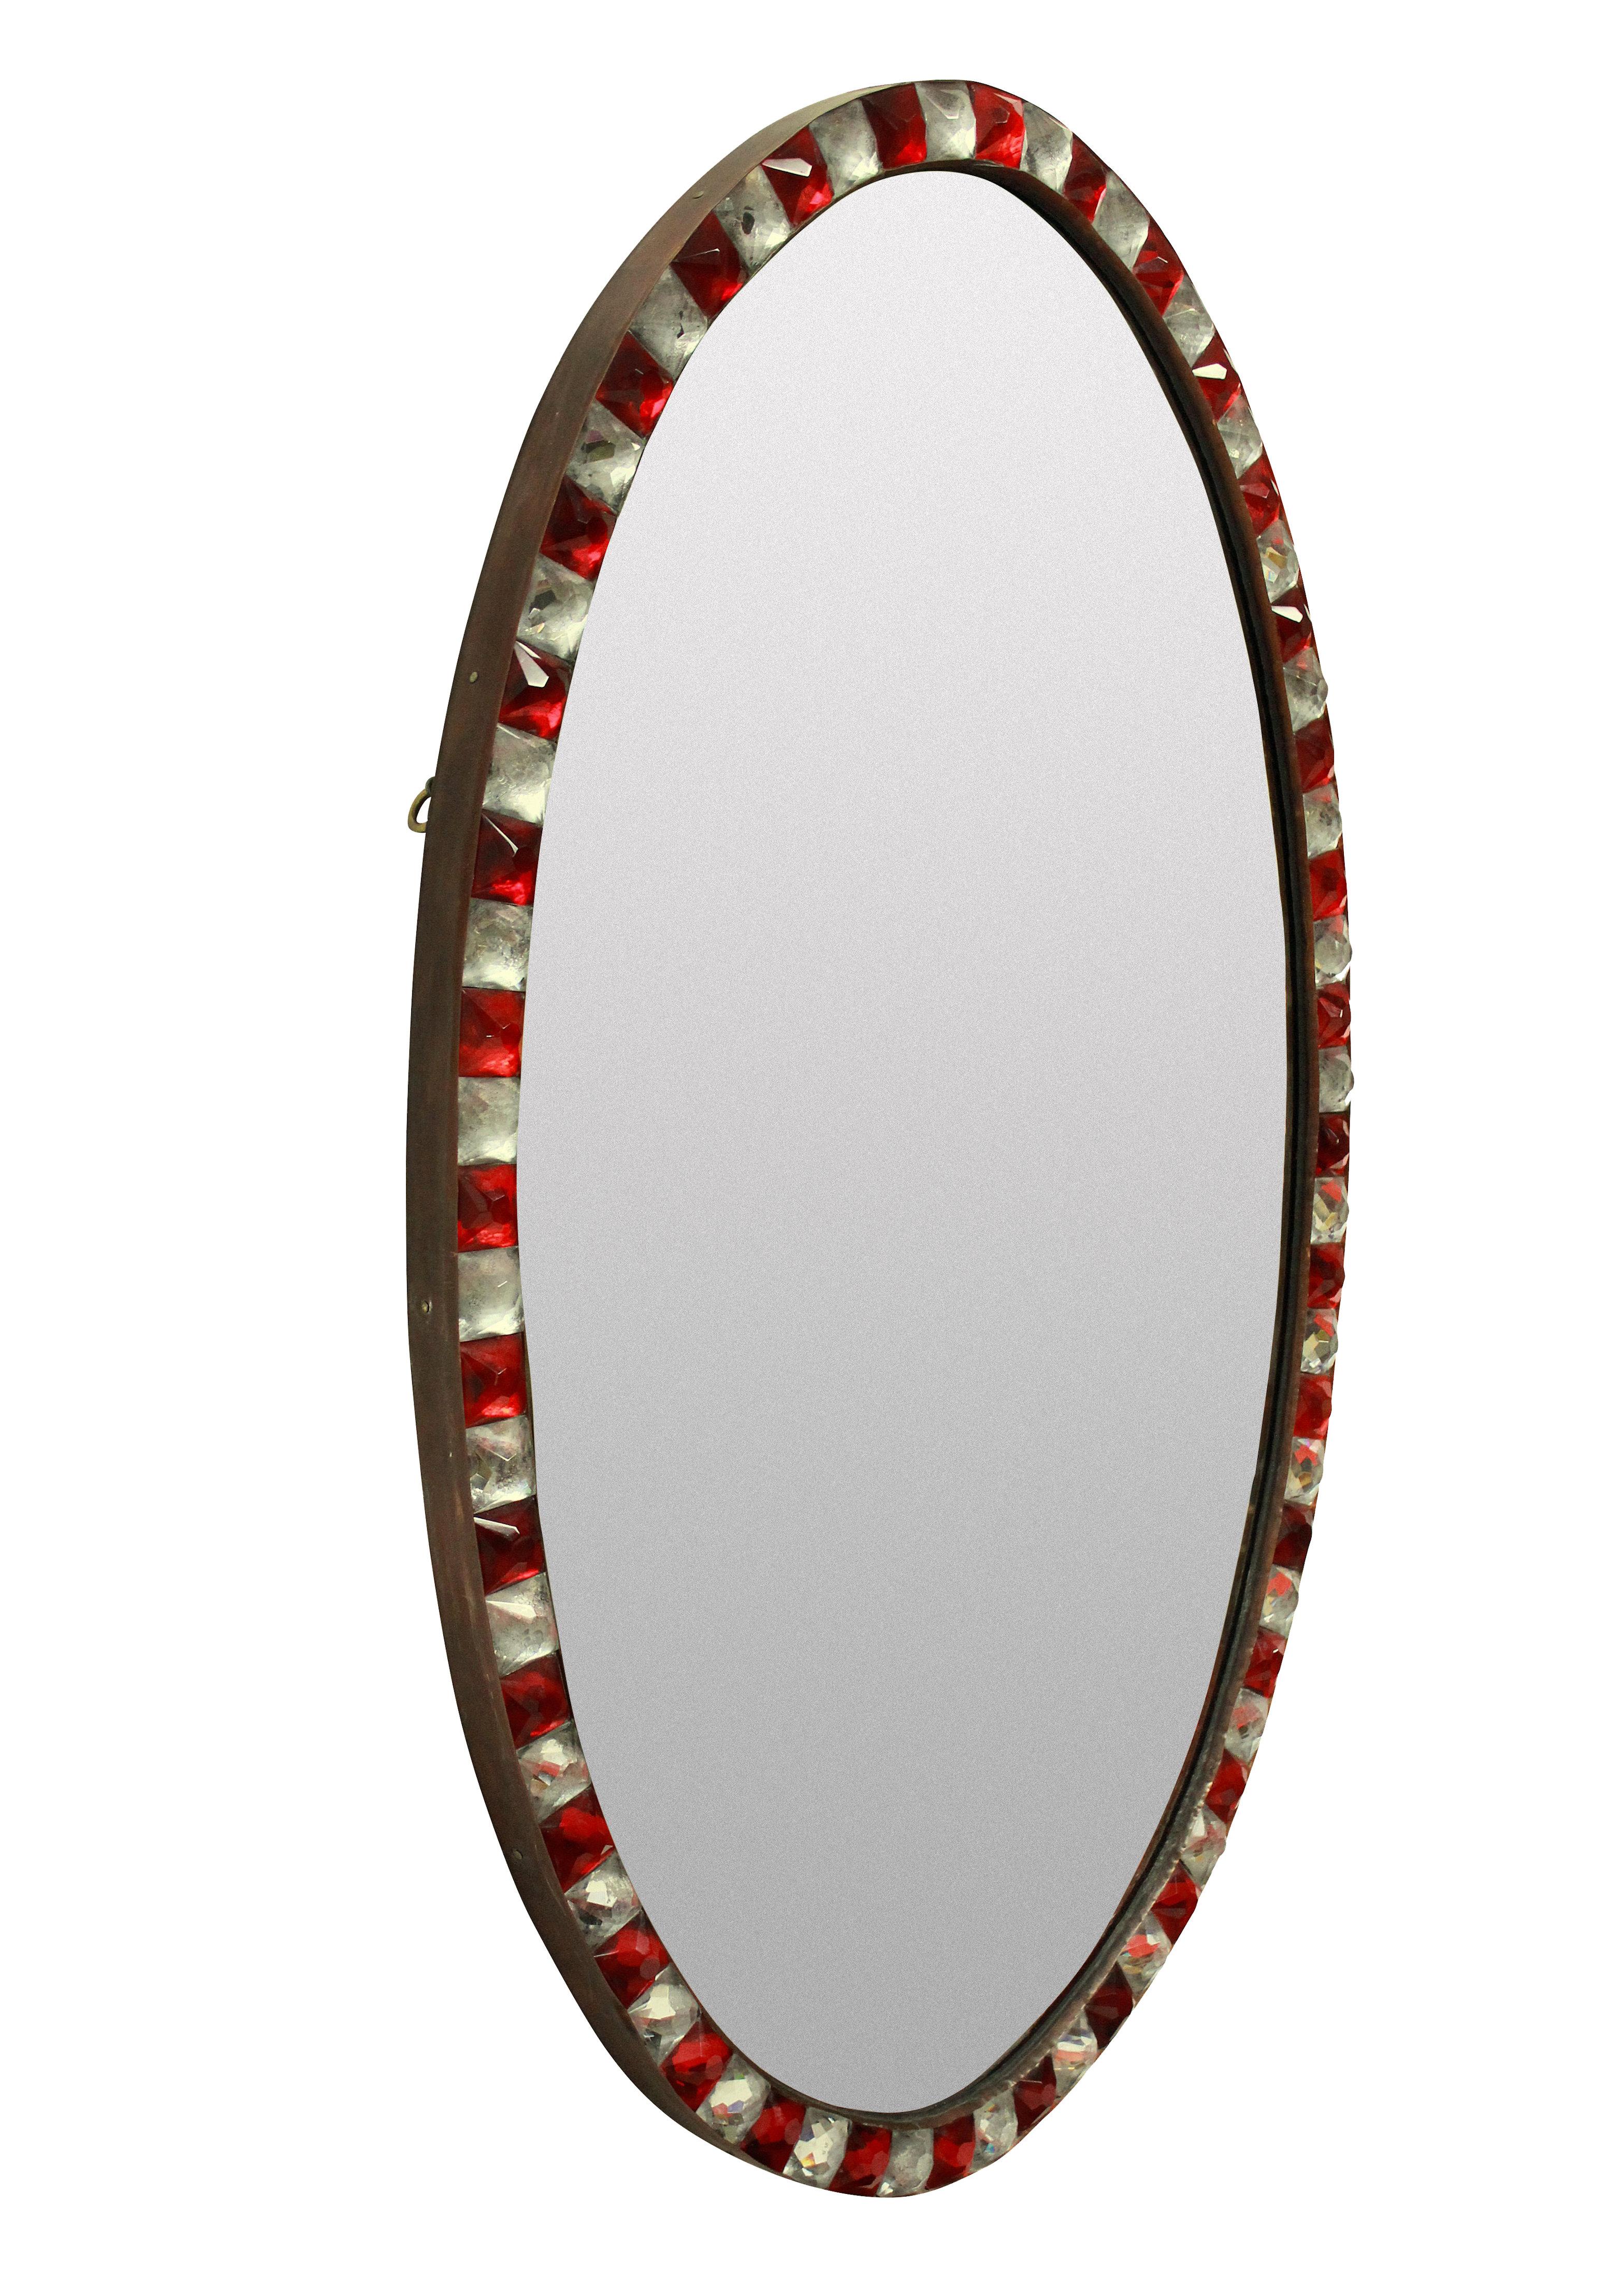 Late 20th Century Georgian Style Irish Mirror with Ruby Glass and Rock Crystal Faceted Border